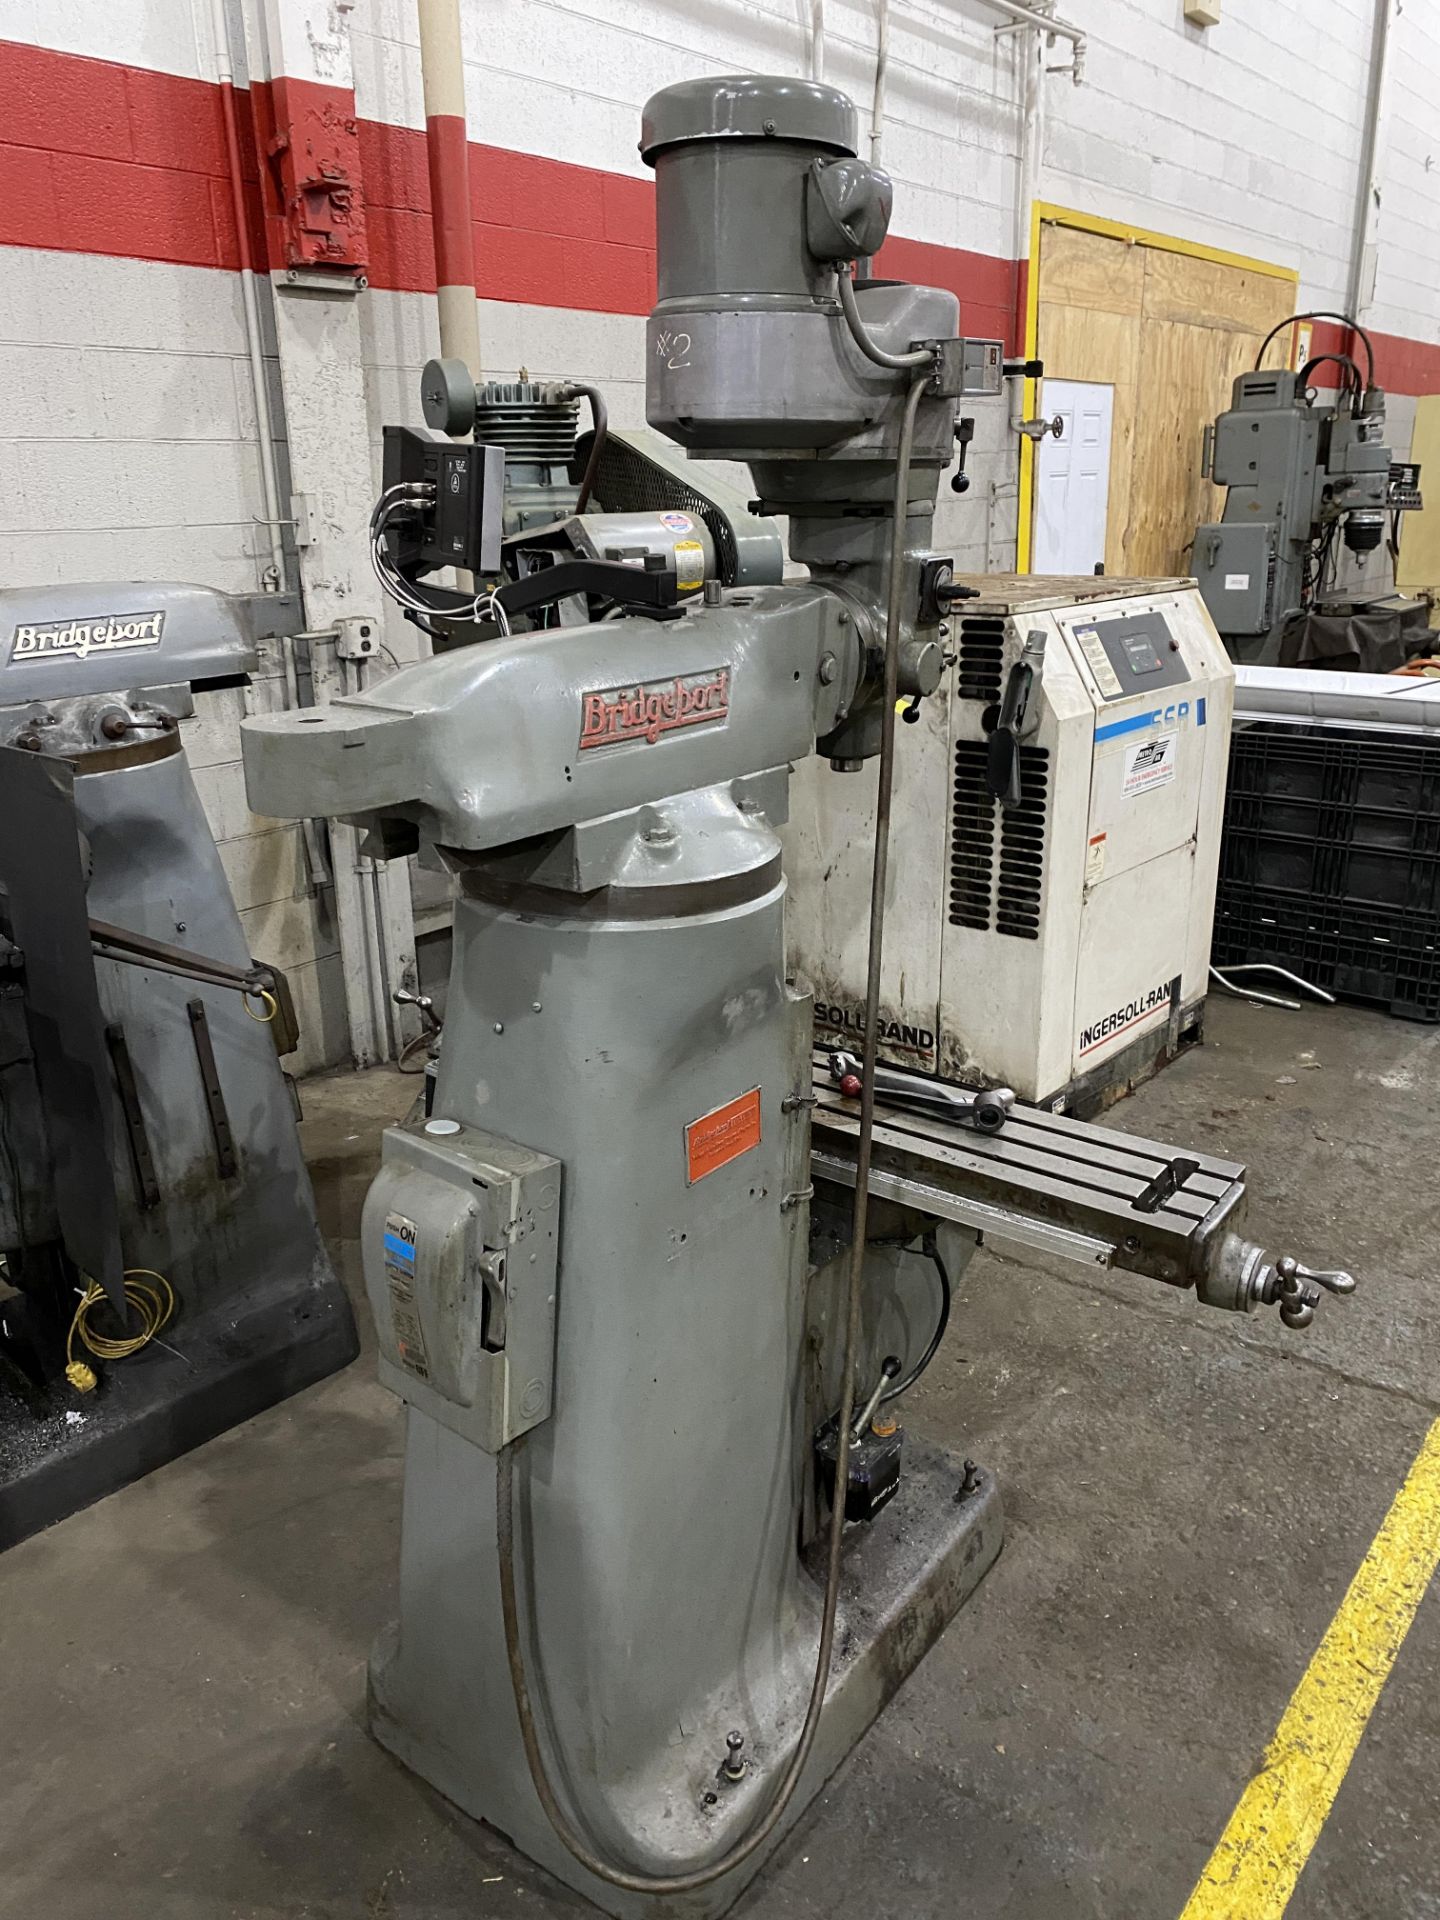 Bridgeport Series I Vertical Mill, 9" x 48", Variable Speed w/DRO - Image 3 of 10